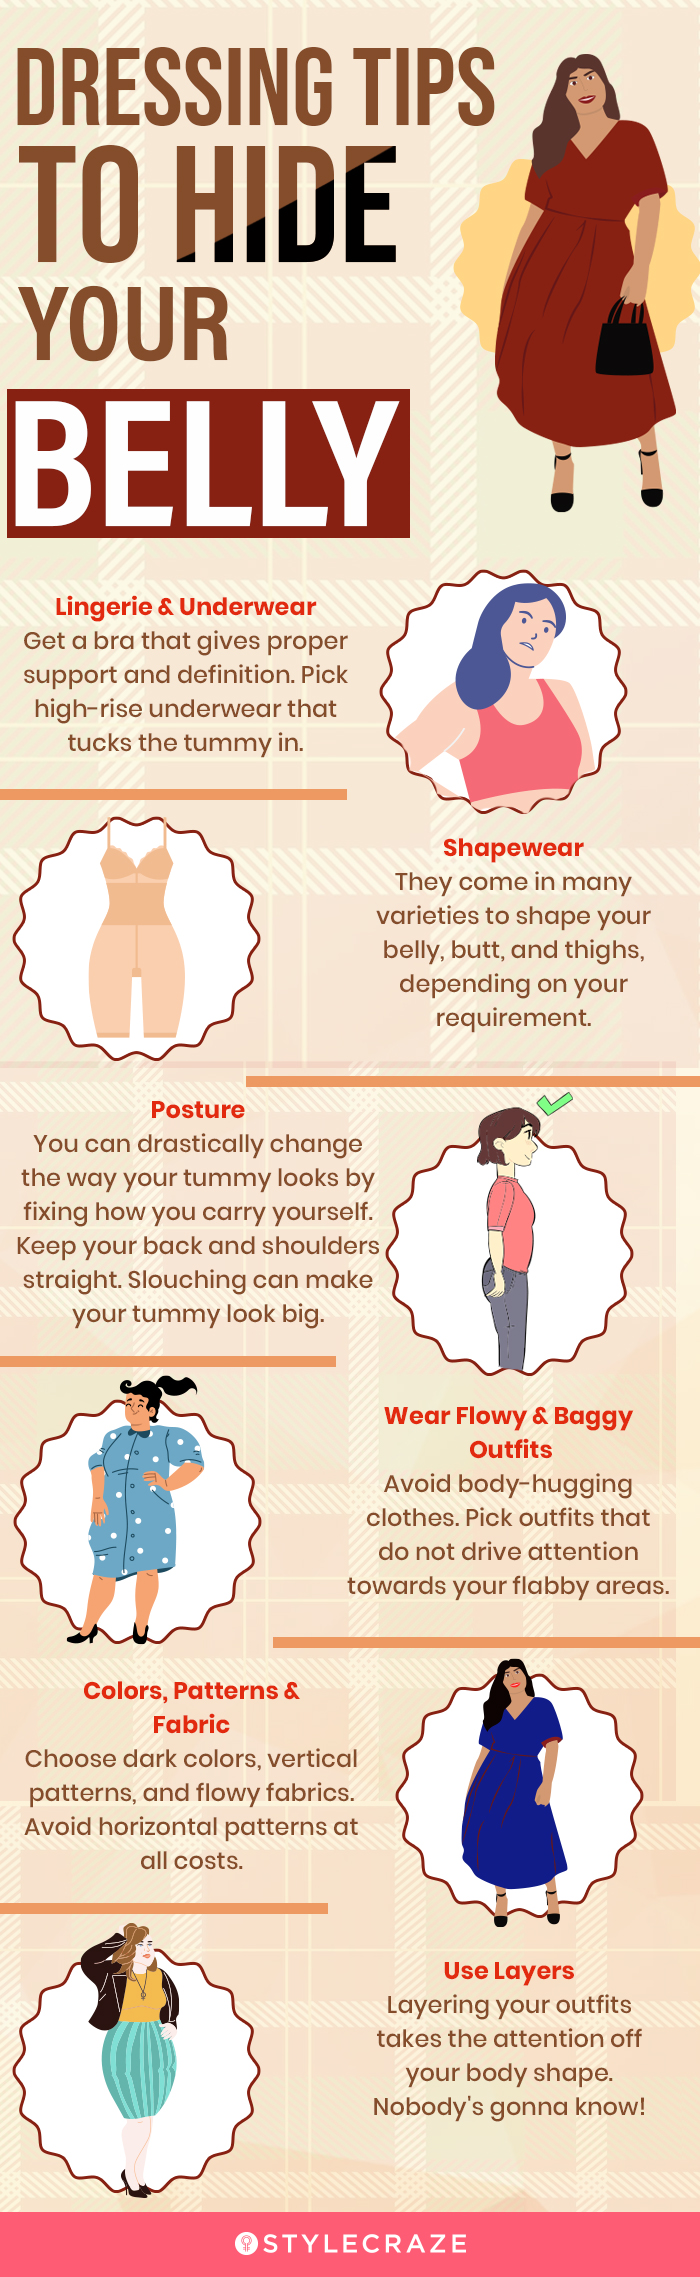 dressing tips to hide your belly (infographic)